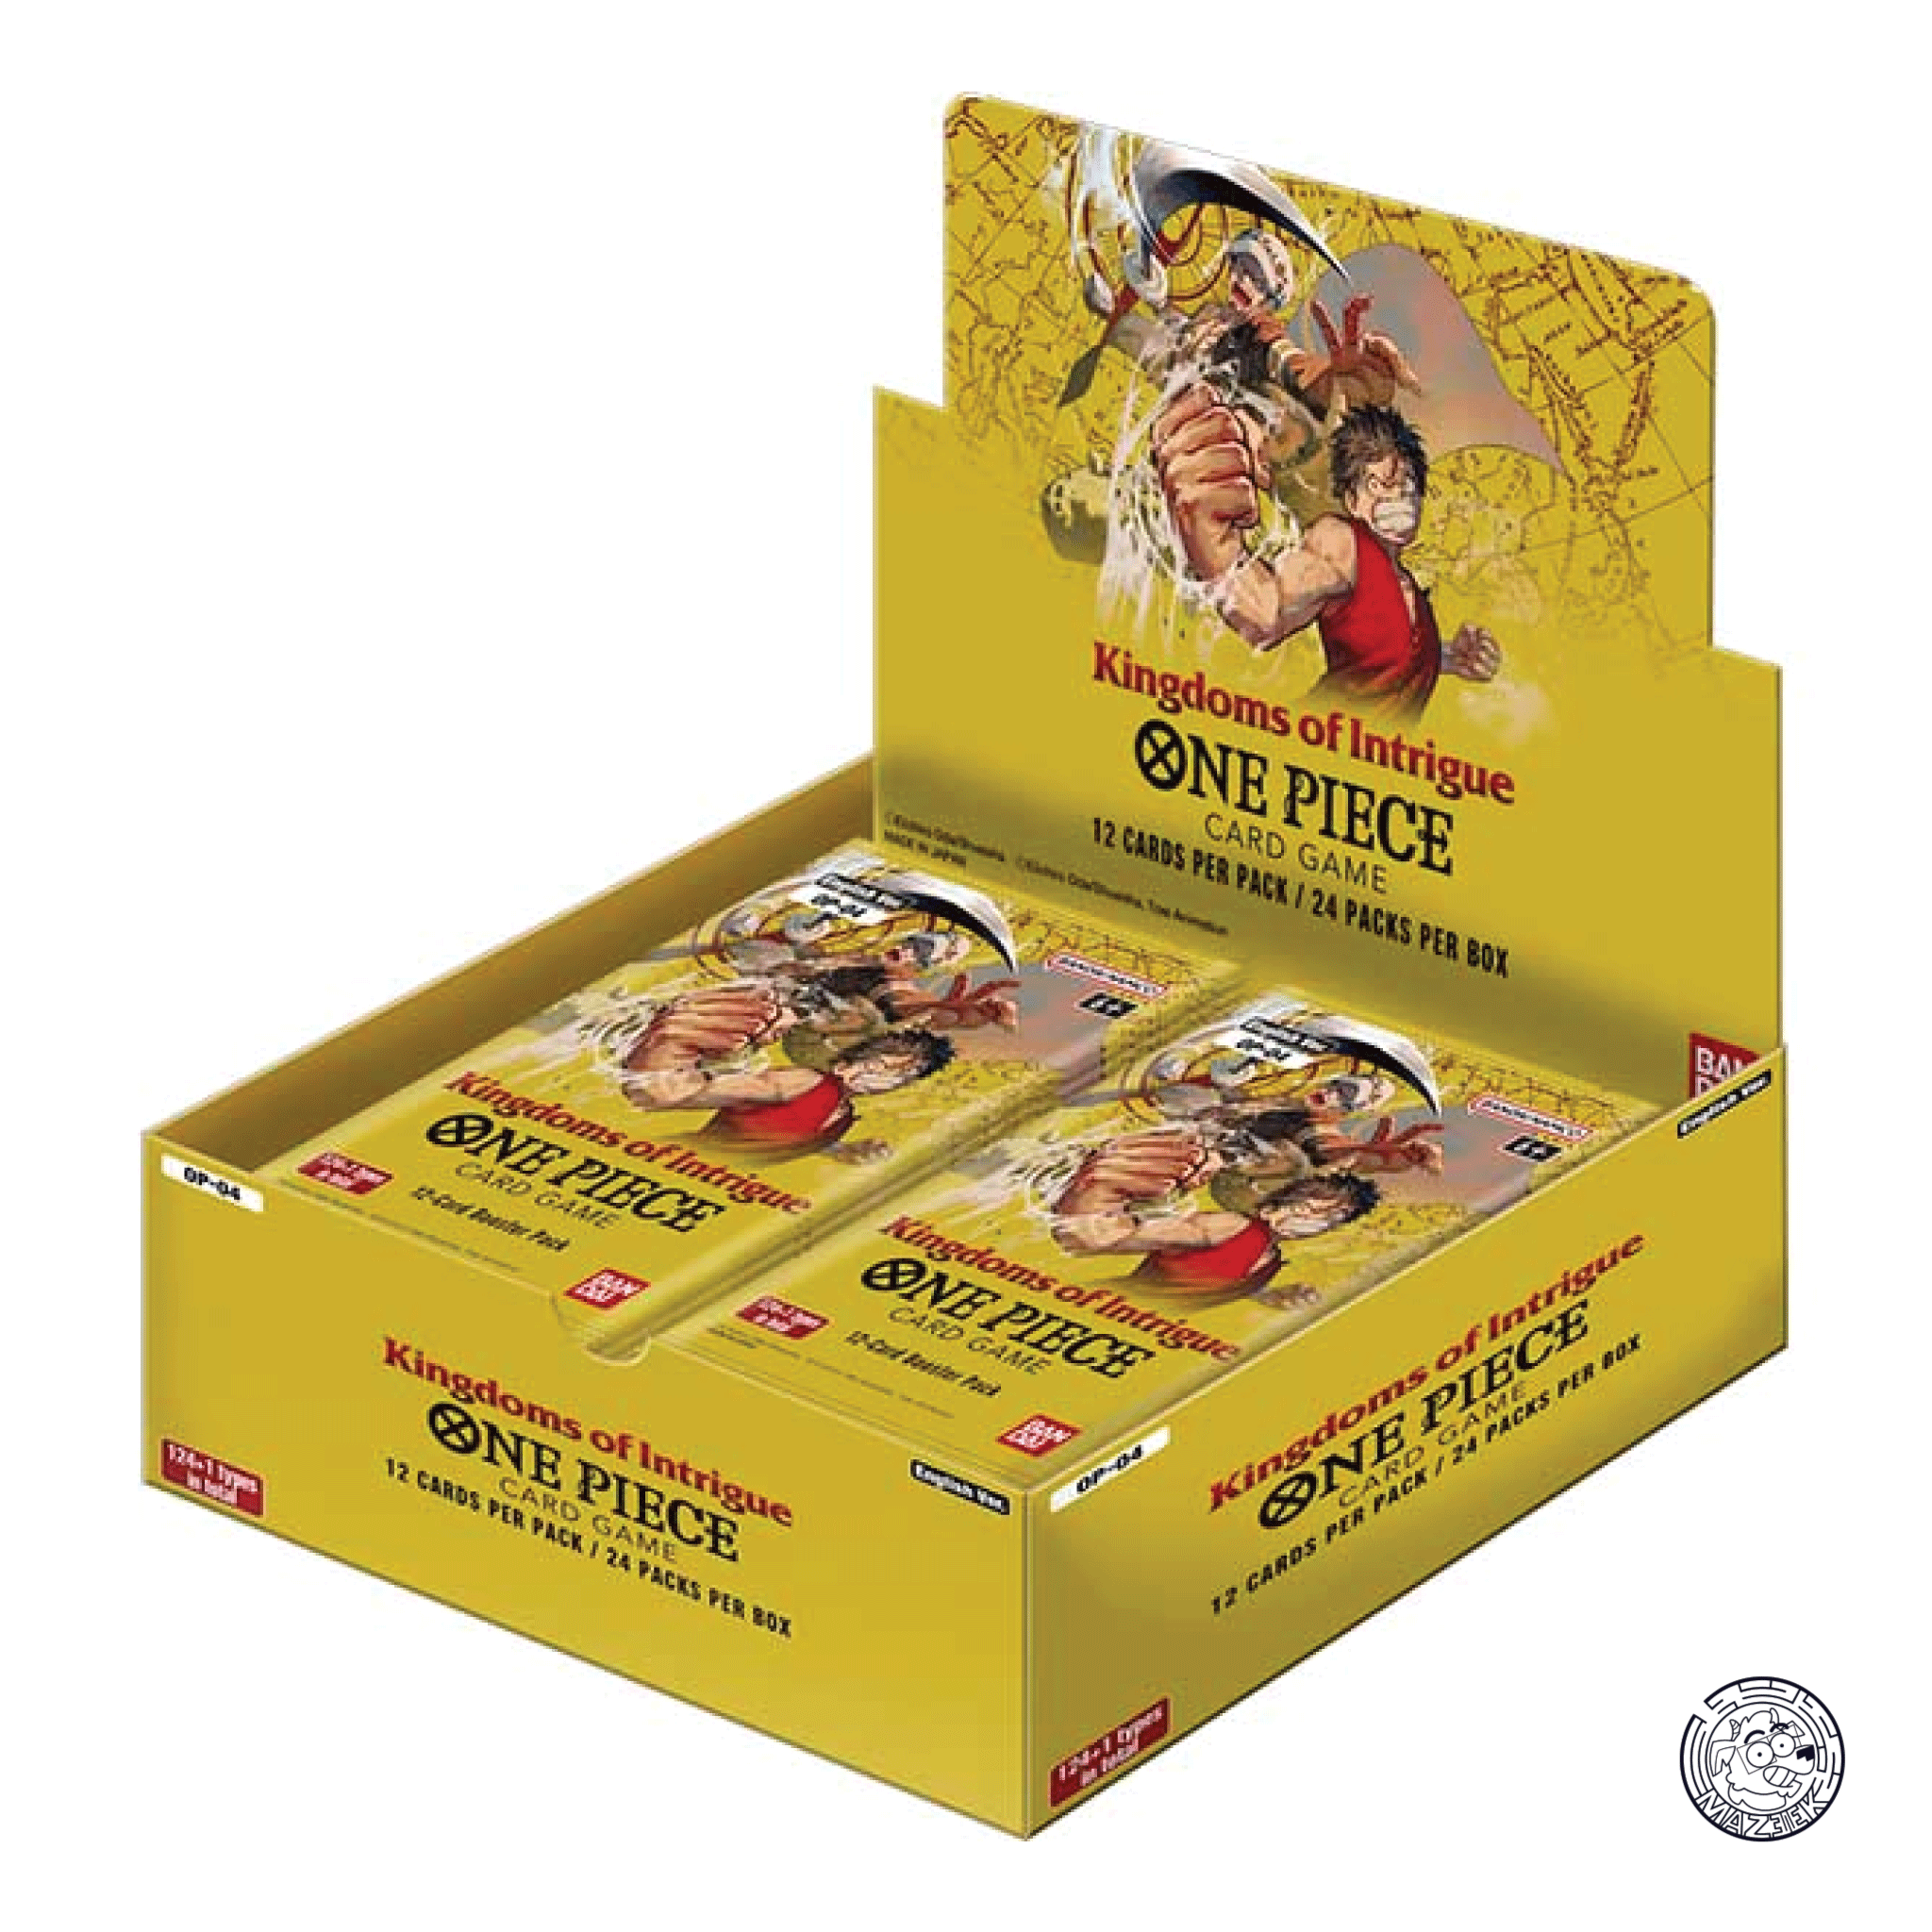 One piece! Card Game OP-04: Kingdoms of Intrigue (24 packs) ENG